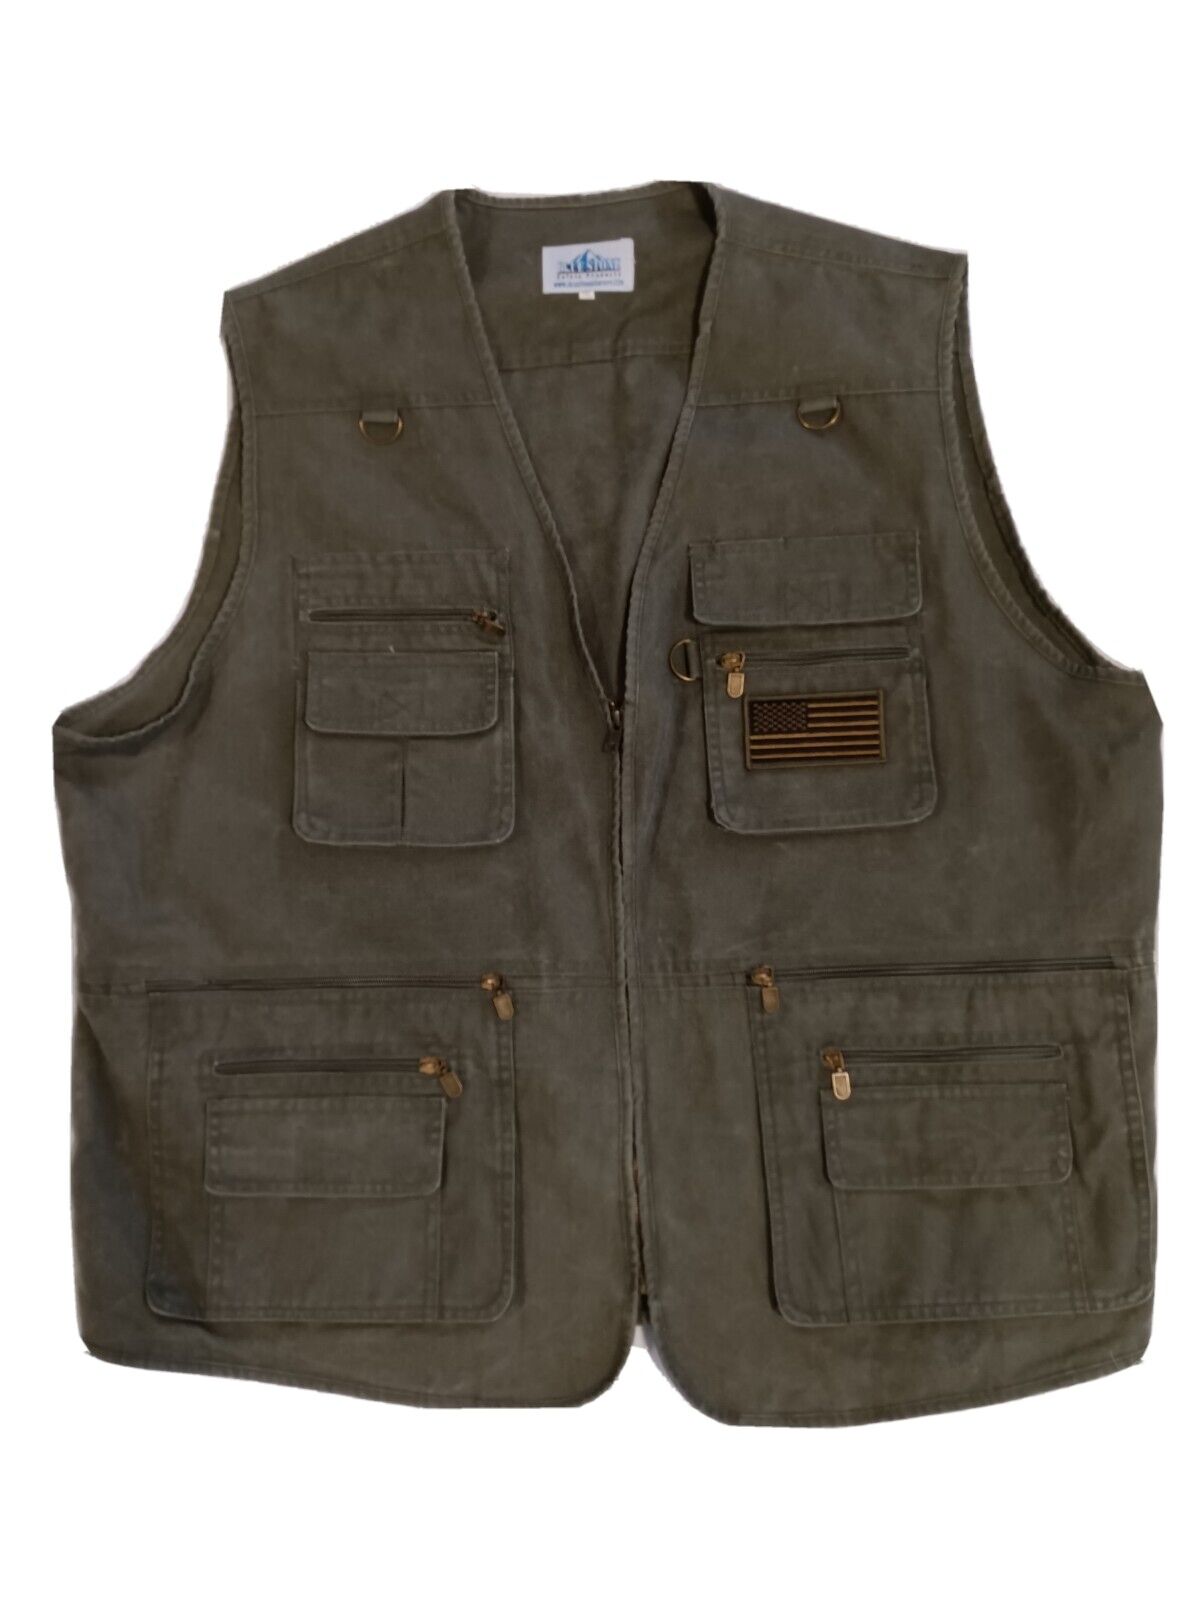 Omaha Mall Popular brand Concealment Vest Mens 5XL by Blue SE Stone Carry Products Safety